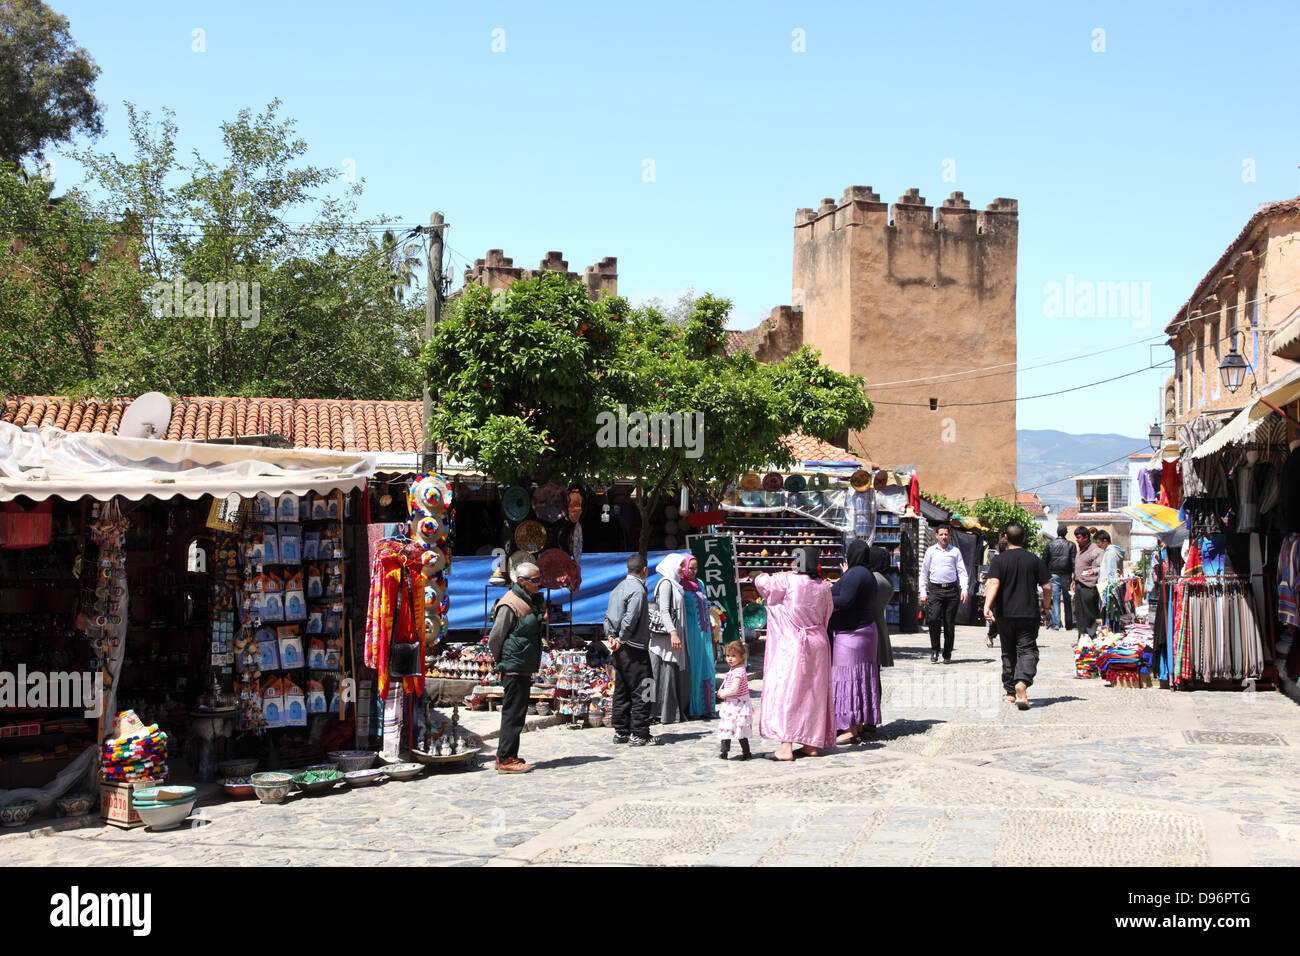 Square in the medina of Chefchaouen, Morocco Stock Photo